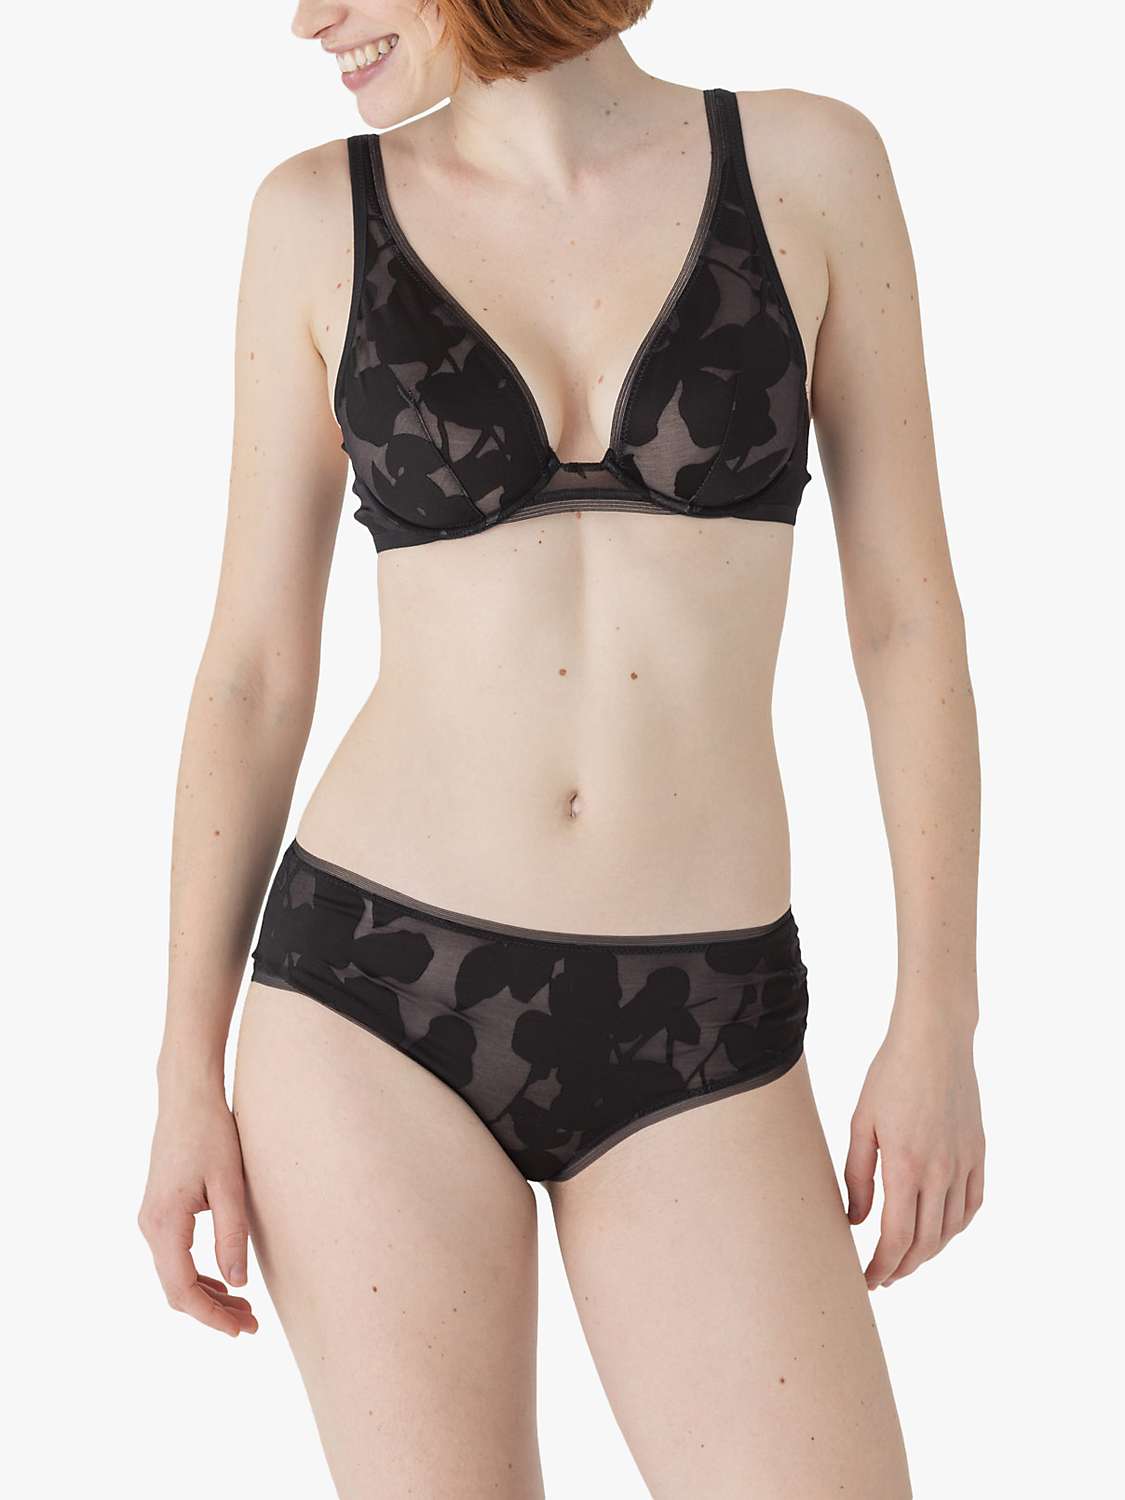 Buy Maison Lejaby Ombrage Tanga Knickers Online at johnlewis.com